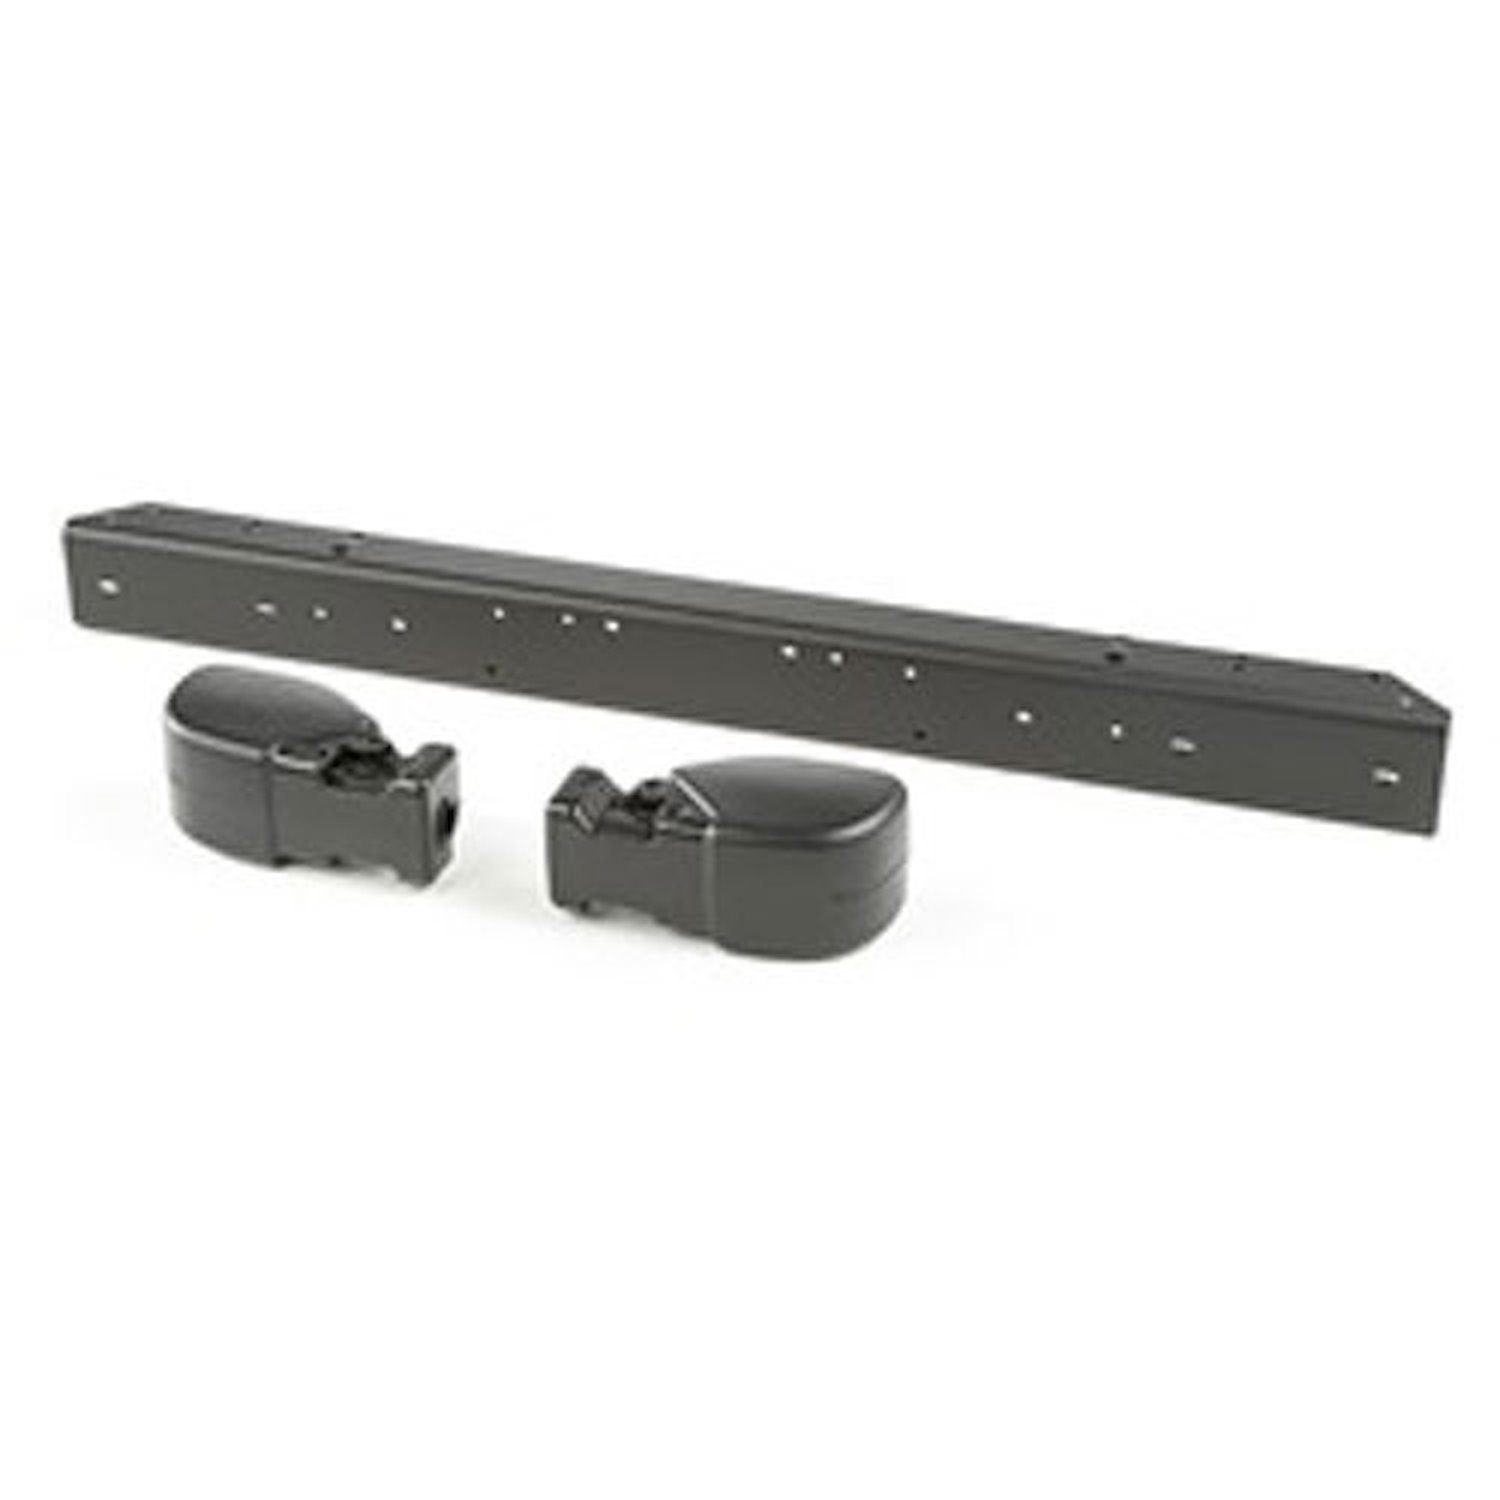 This front bumper kit from Omix-ADA fits 97-06 Jeep Wrangler and includes the front bumper and bumper extensions.